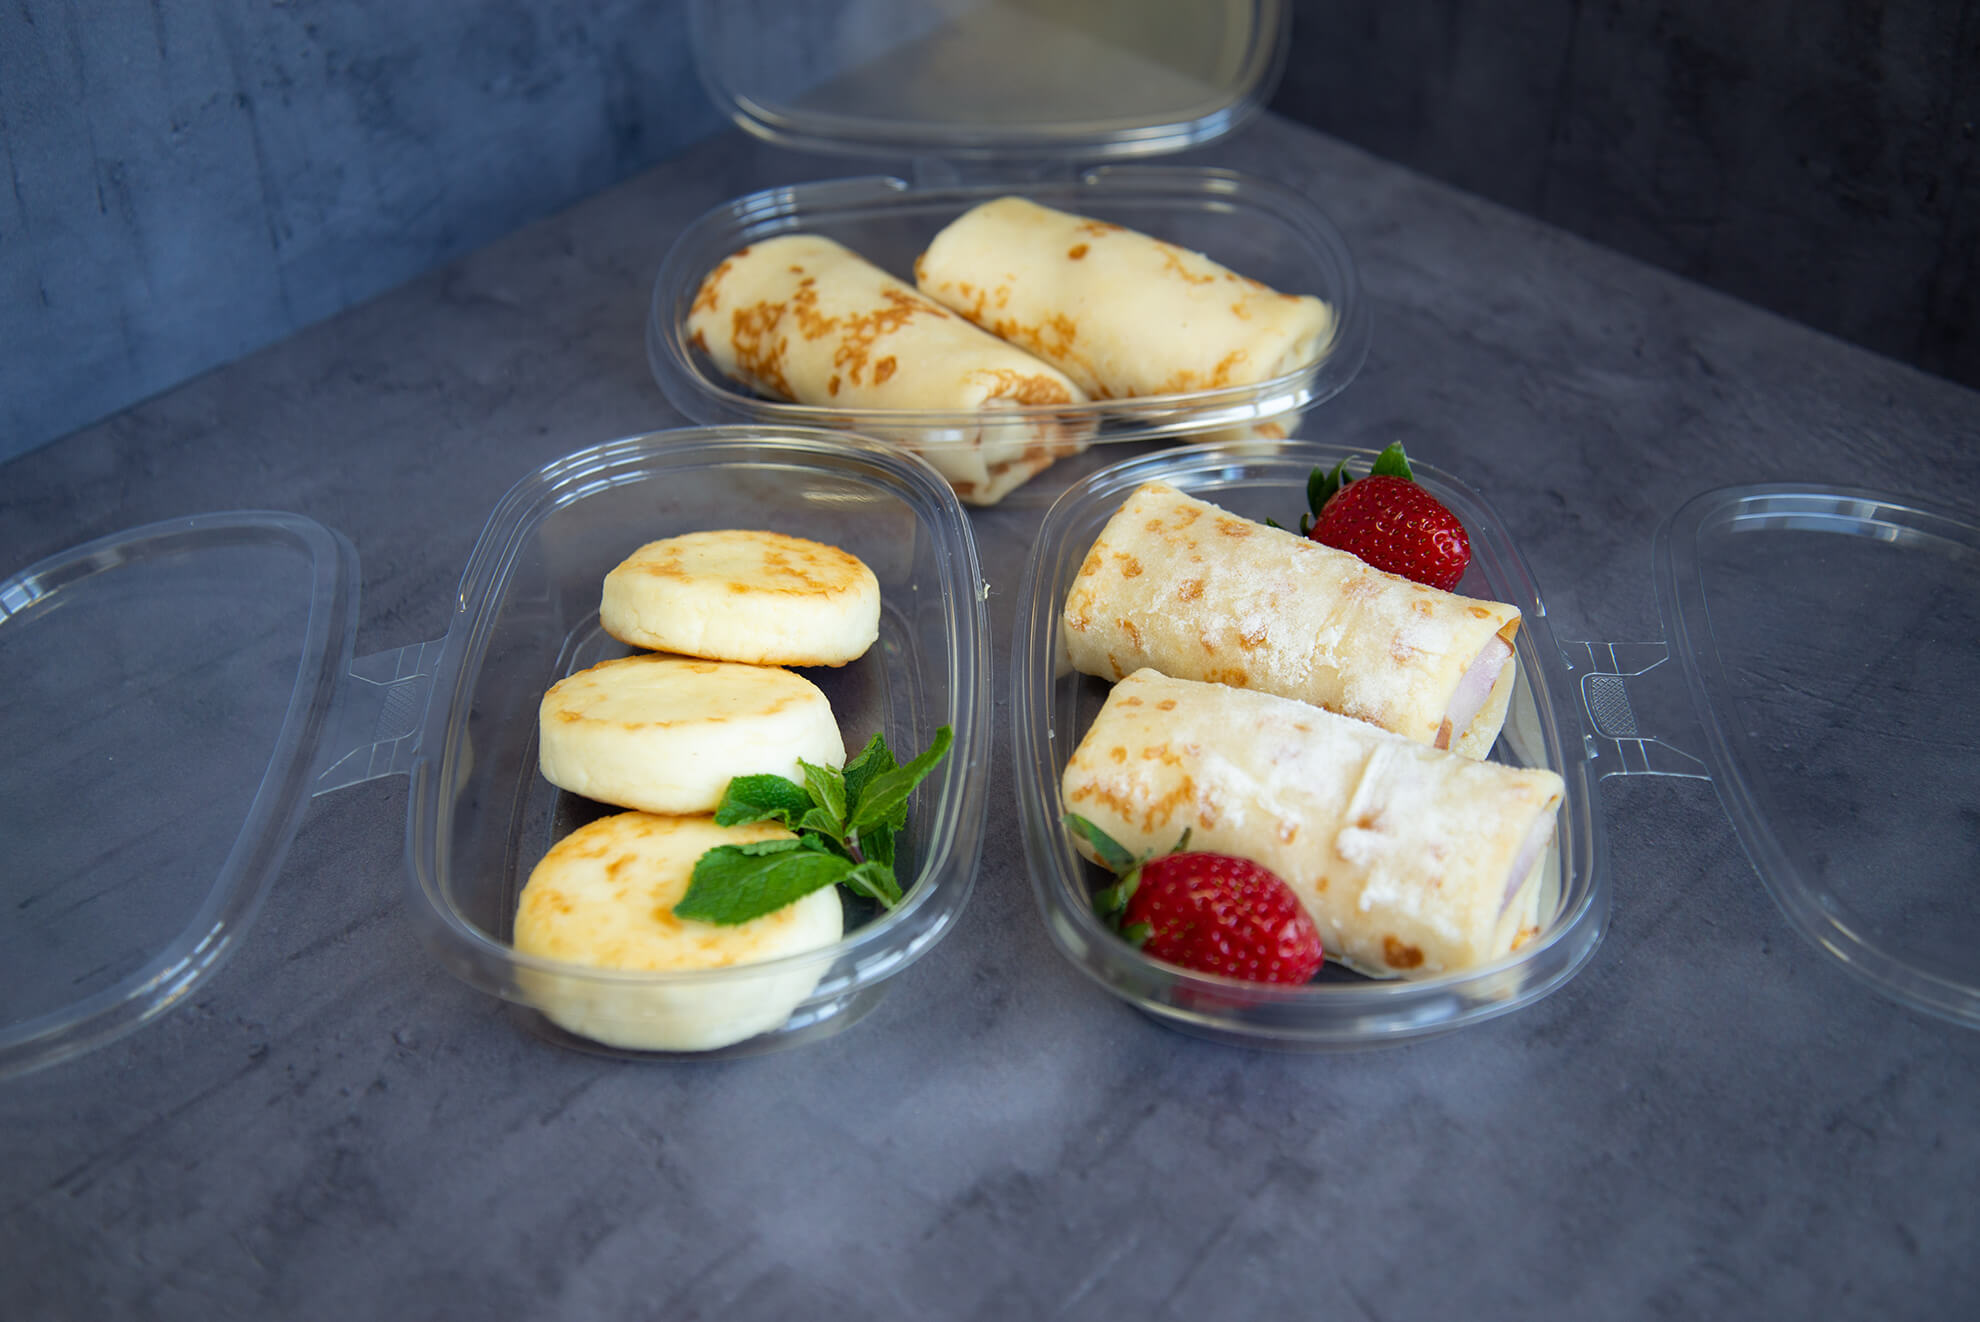 Food in three plastic containers